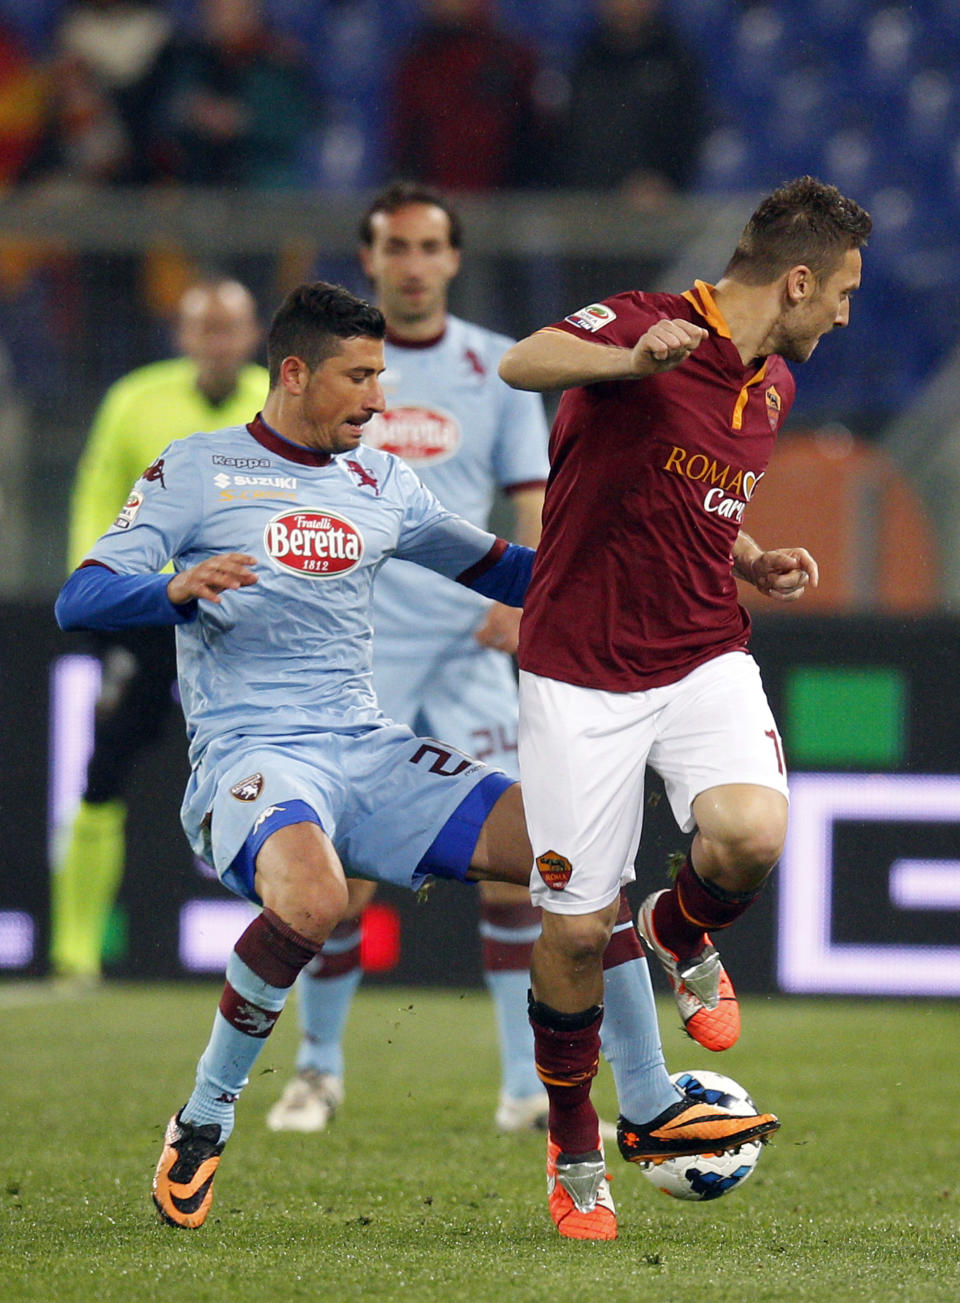 Torino midfielder Giuseppe Vives, left, and AS Roma forward Francesco Totti fight for the ball during a Serie A soccer match between AS Roma and Torino, at Rome's Olympic Stadium, Tuesday, March 25, 2014. (AP Photo/Andrew Medichini)